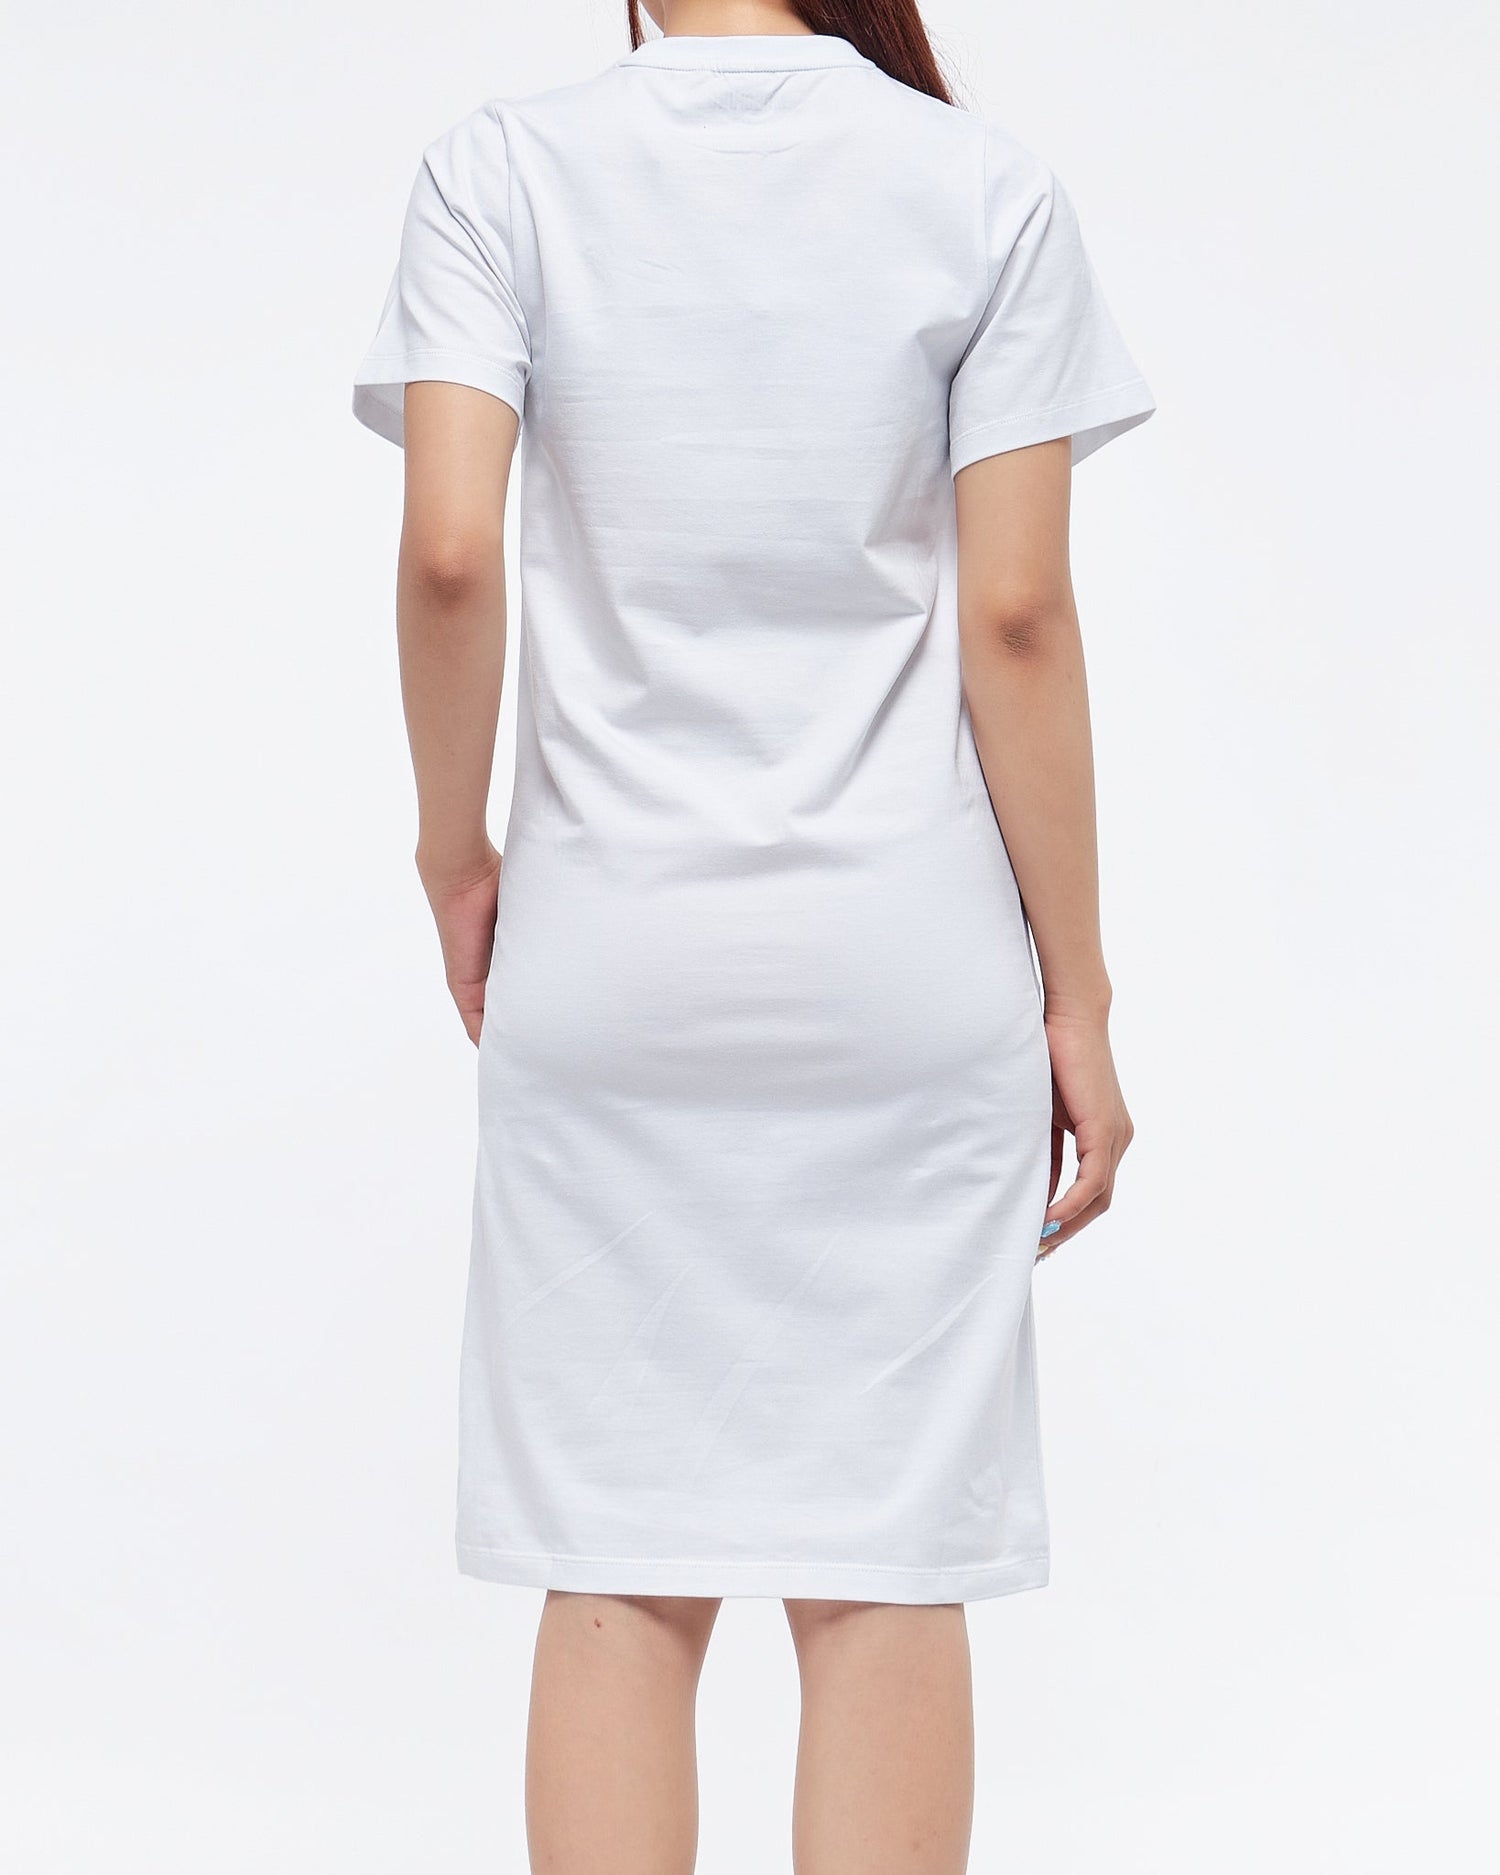 MOI OUTFIT-Logo Printed Lady T-Shirt Dress 17.90